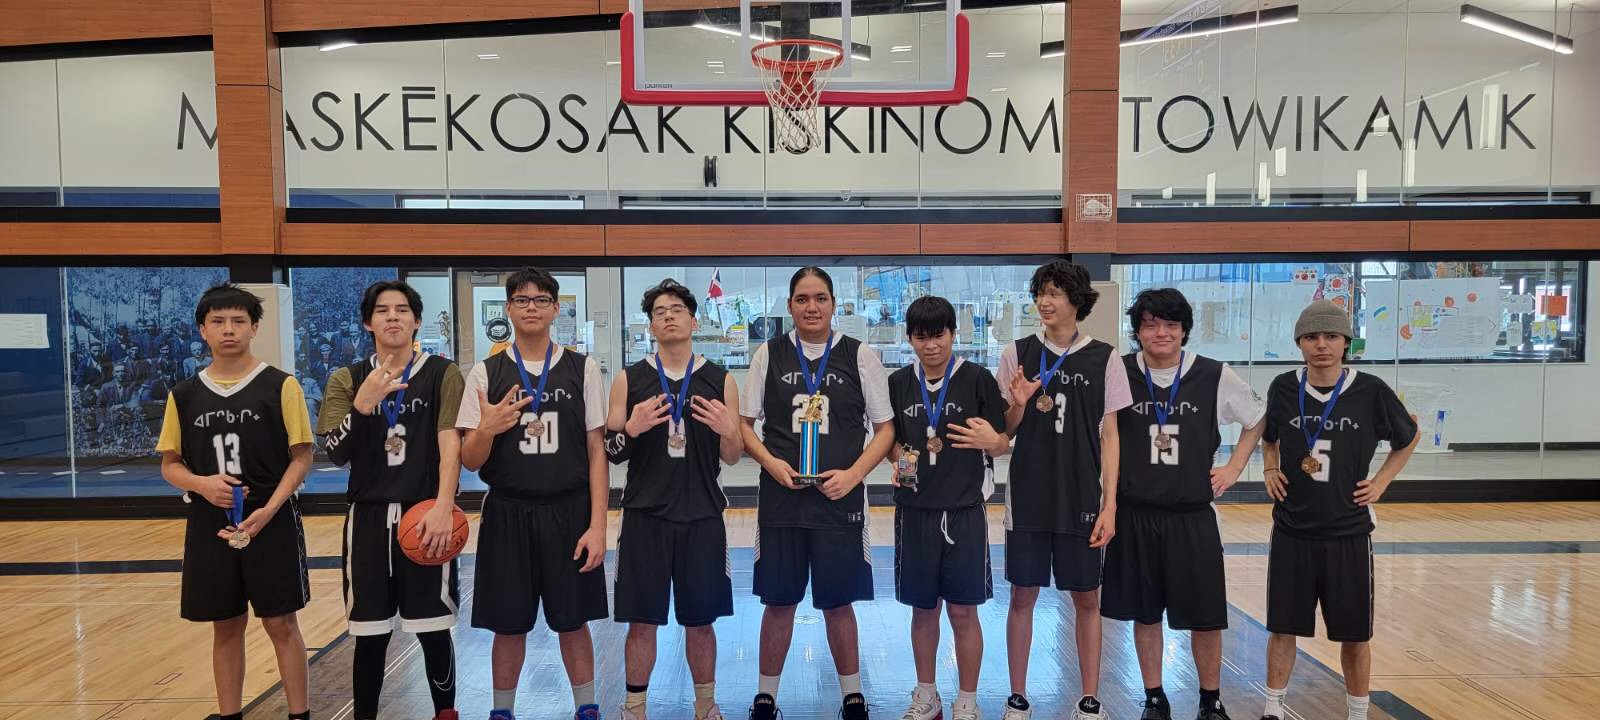 Senior High Basketball Team finished 3rd in the Battle of the Bands